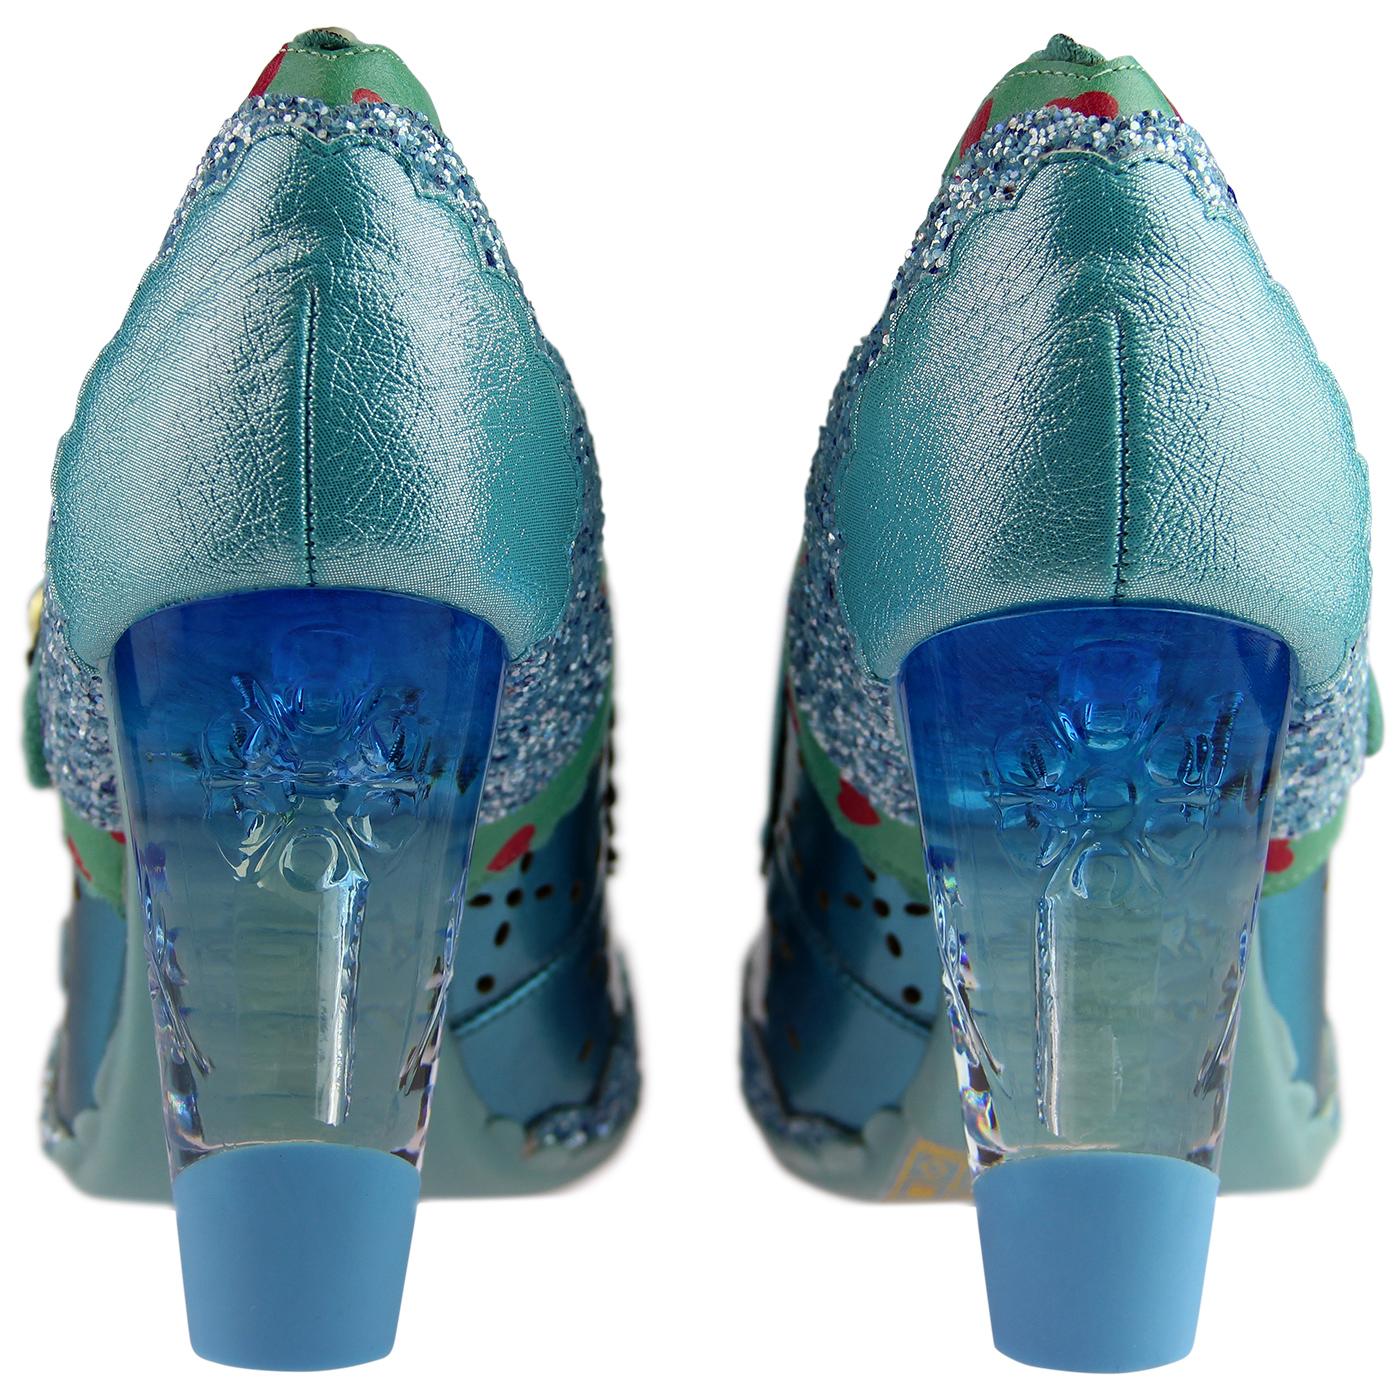 A Blue Mid Heel Shoes Irregular Choice /'Dust Settles/' loads More Styles